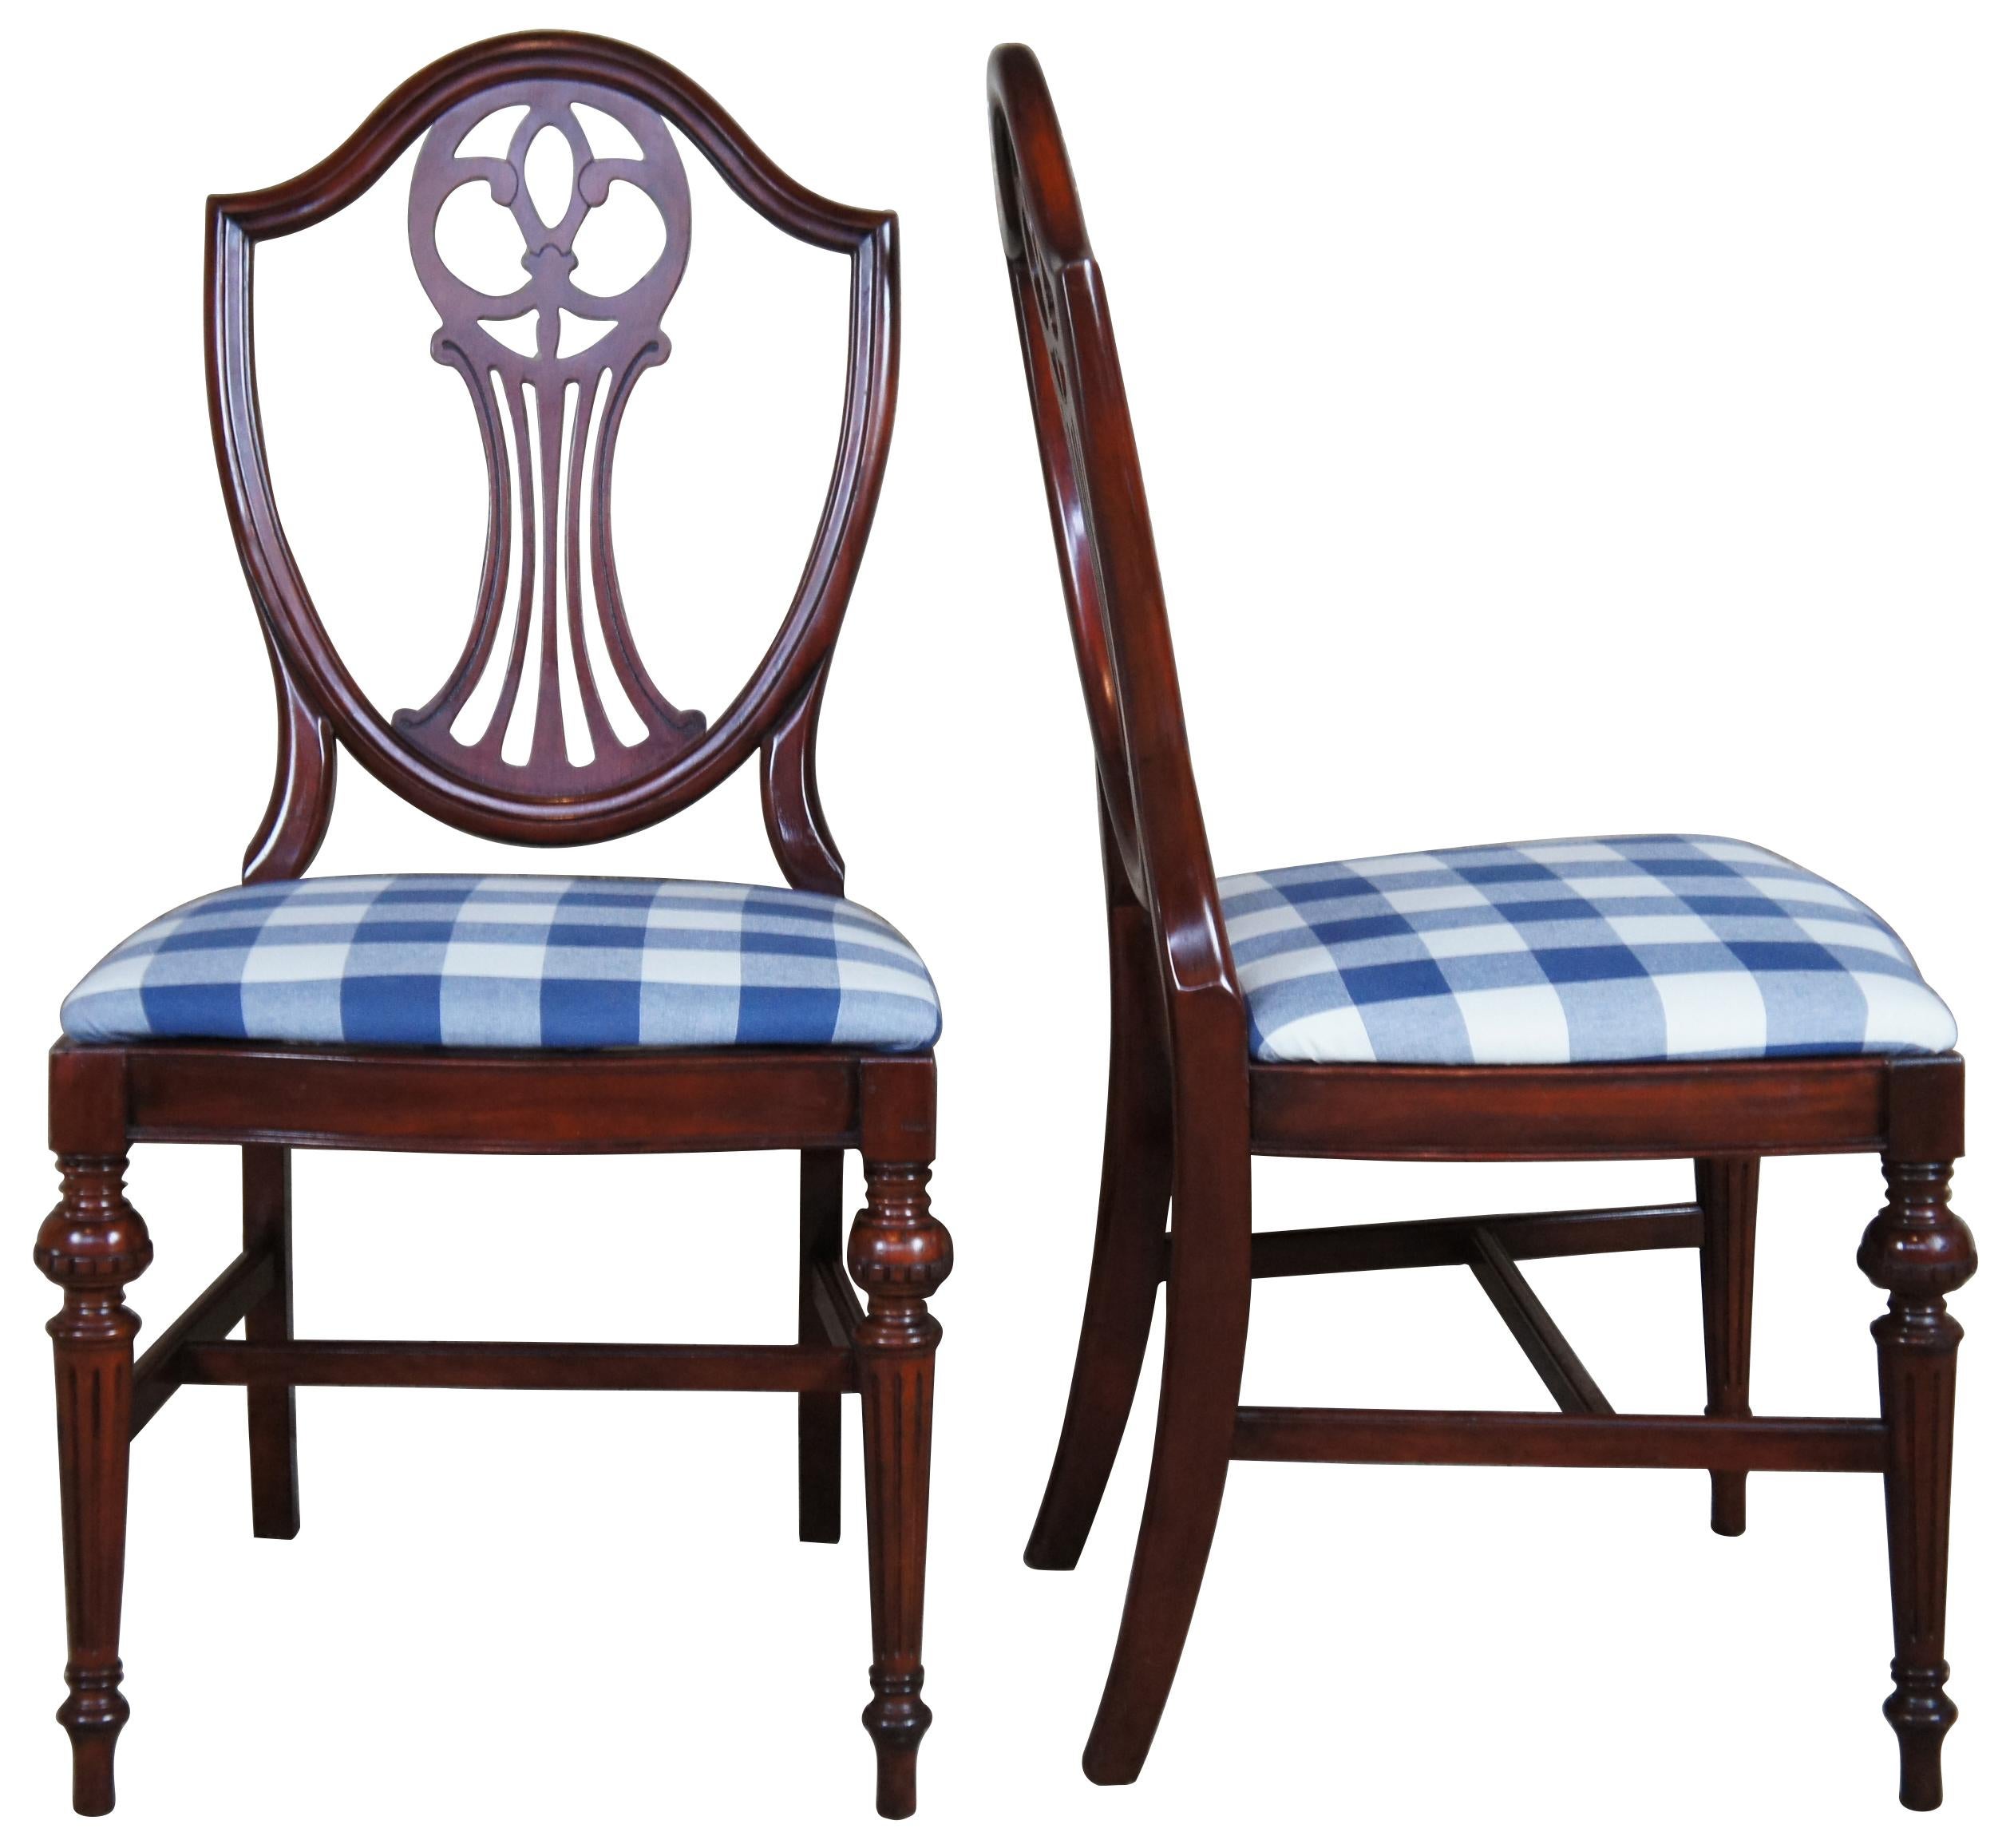 American red mahogany dining chairs, circa 1940s. Features a blend of Sheraton and Hepplewhite styling with a pierced shield back. Upholstered in a white and blue check over turned fluted and tapered legs connected by an H-stretcher leading down to